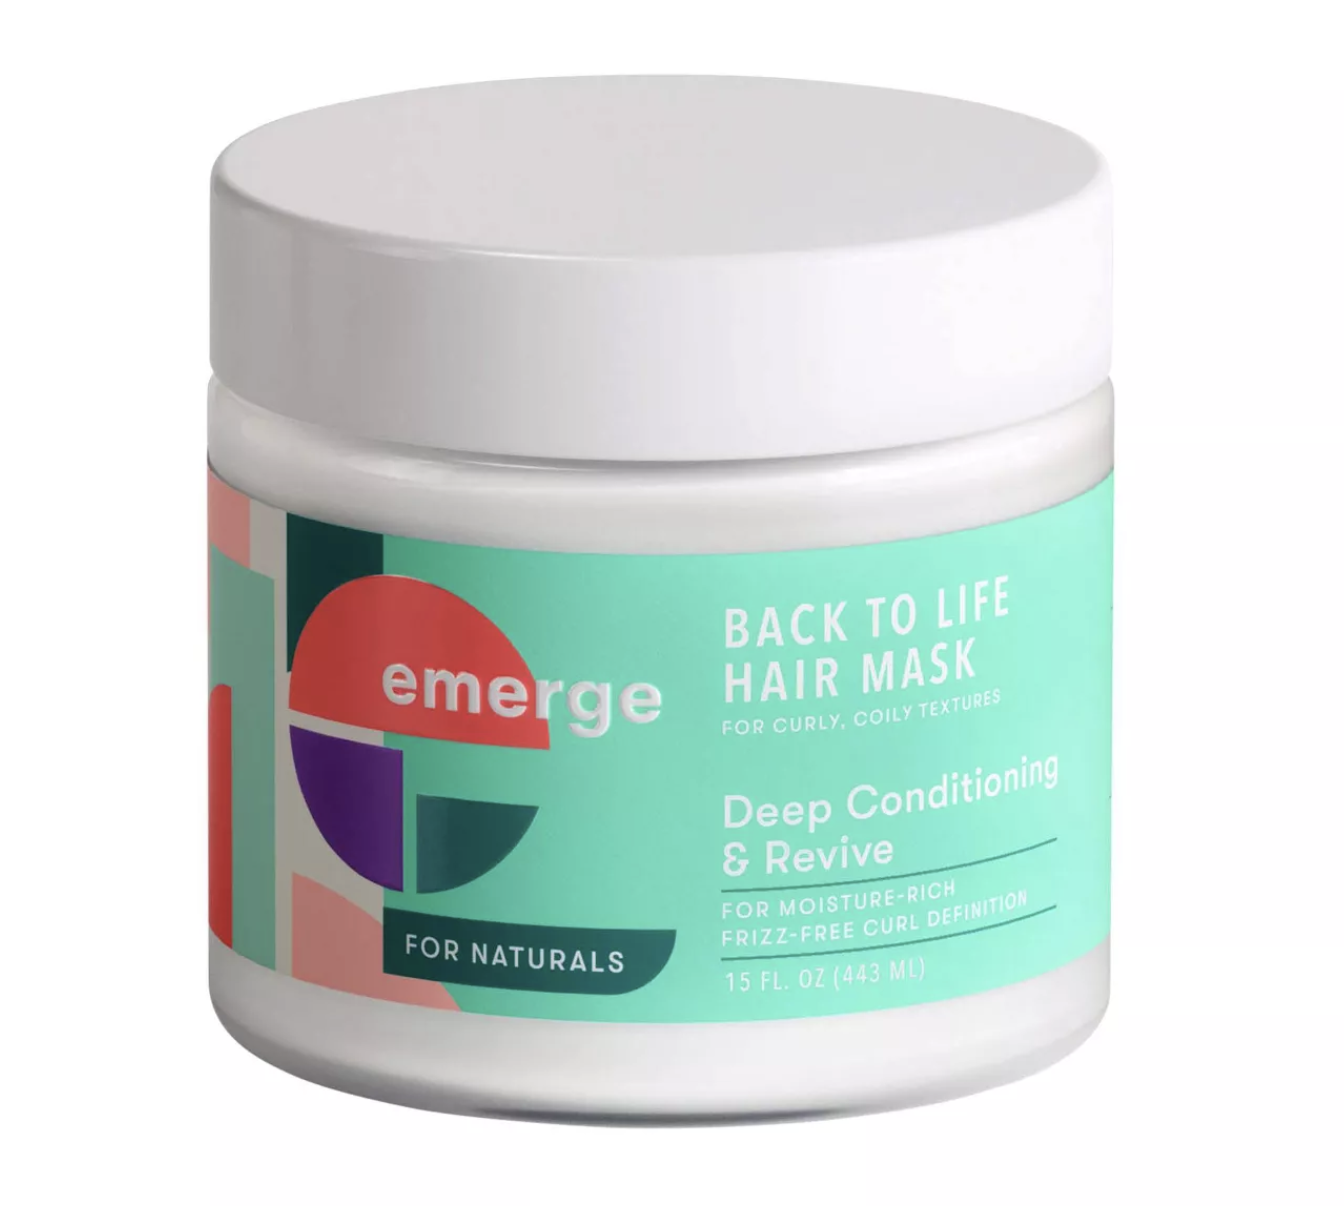 Back to Life Deep Conditioning & Revive Hair Mask